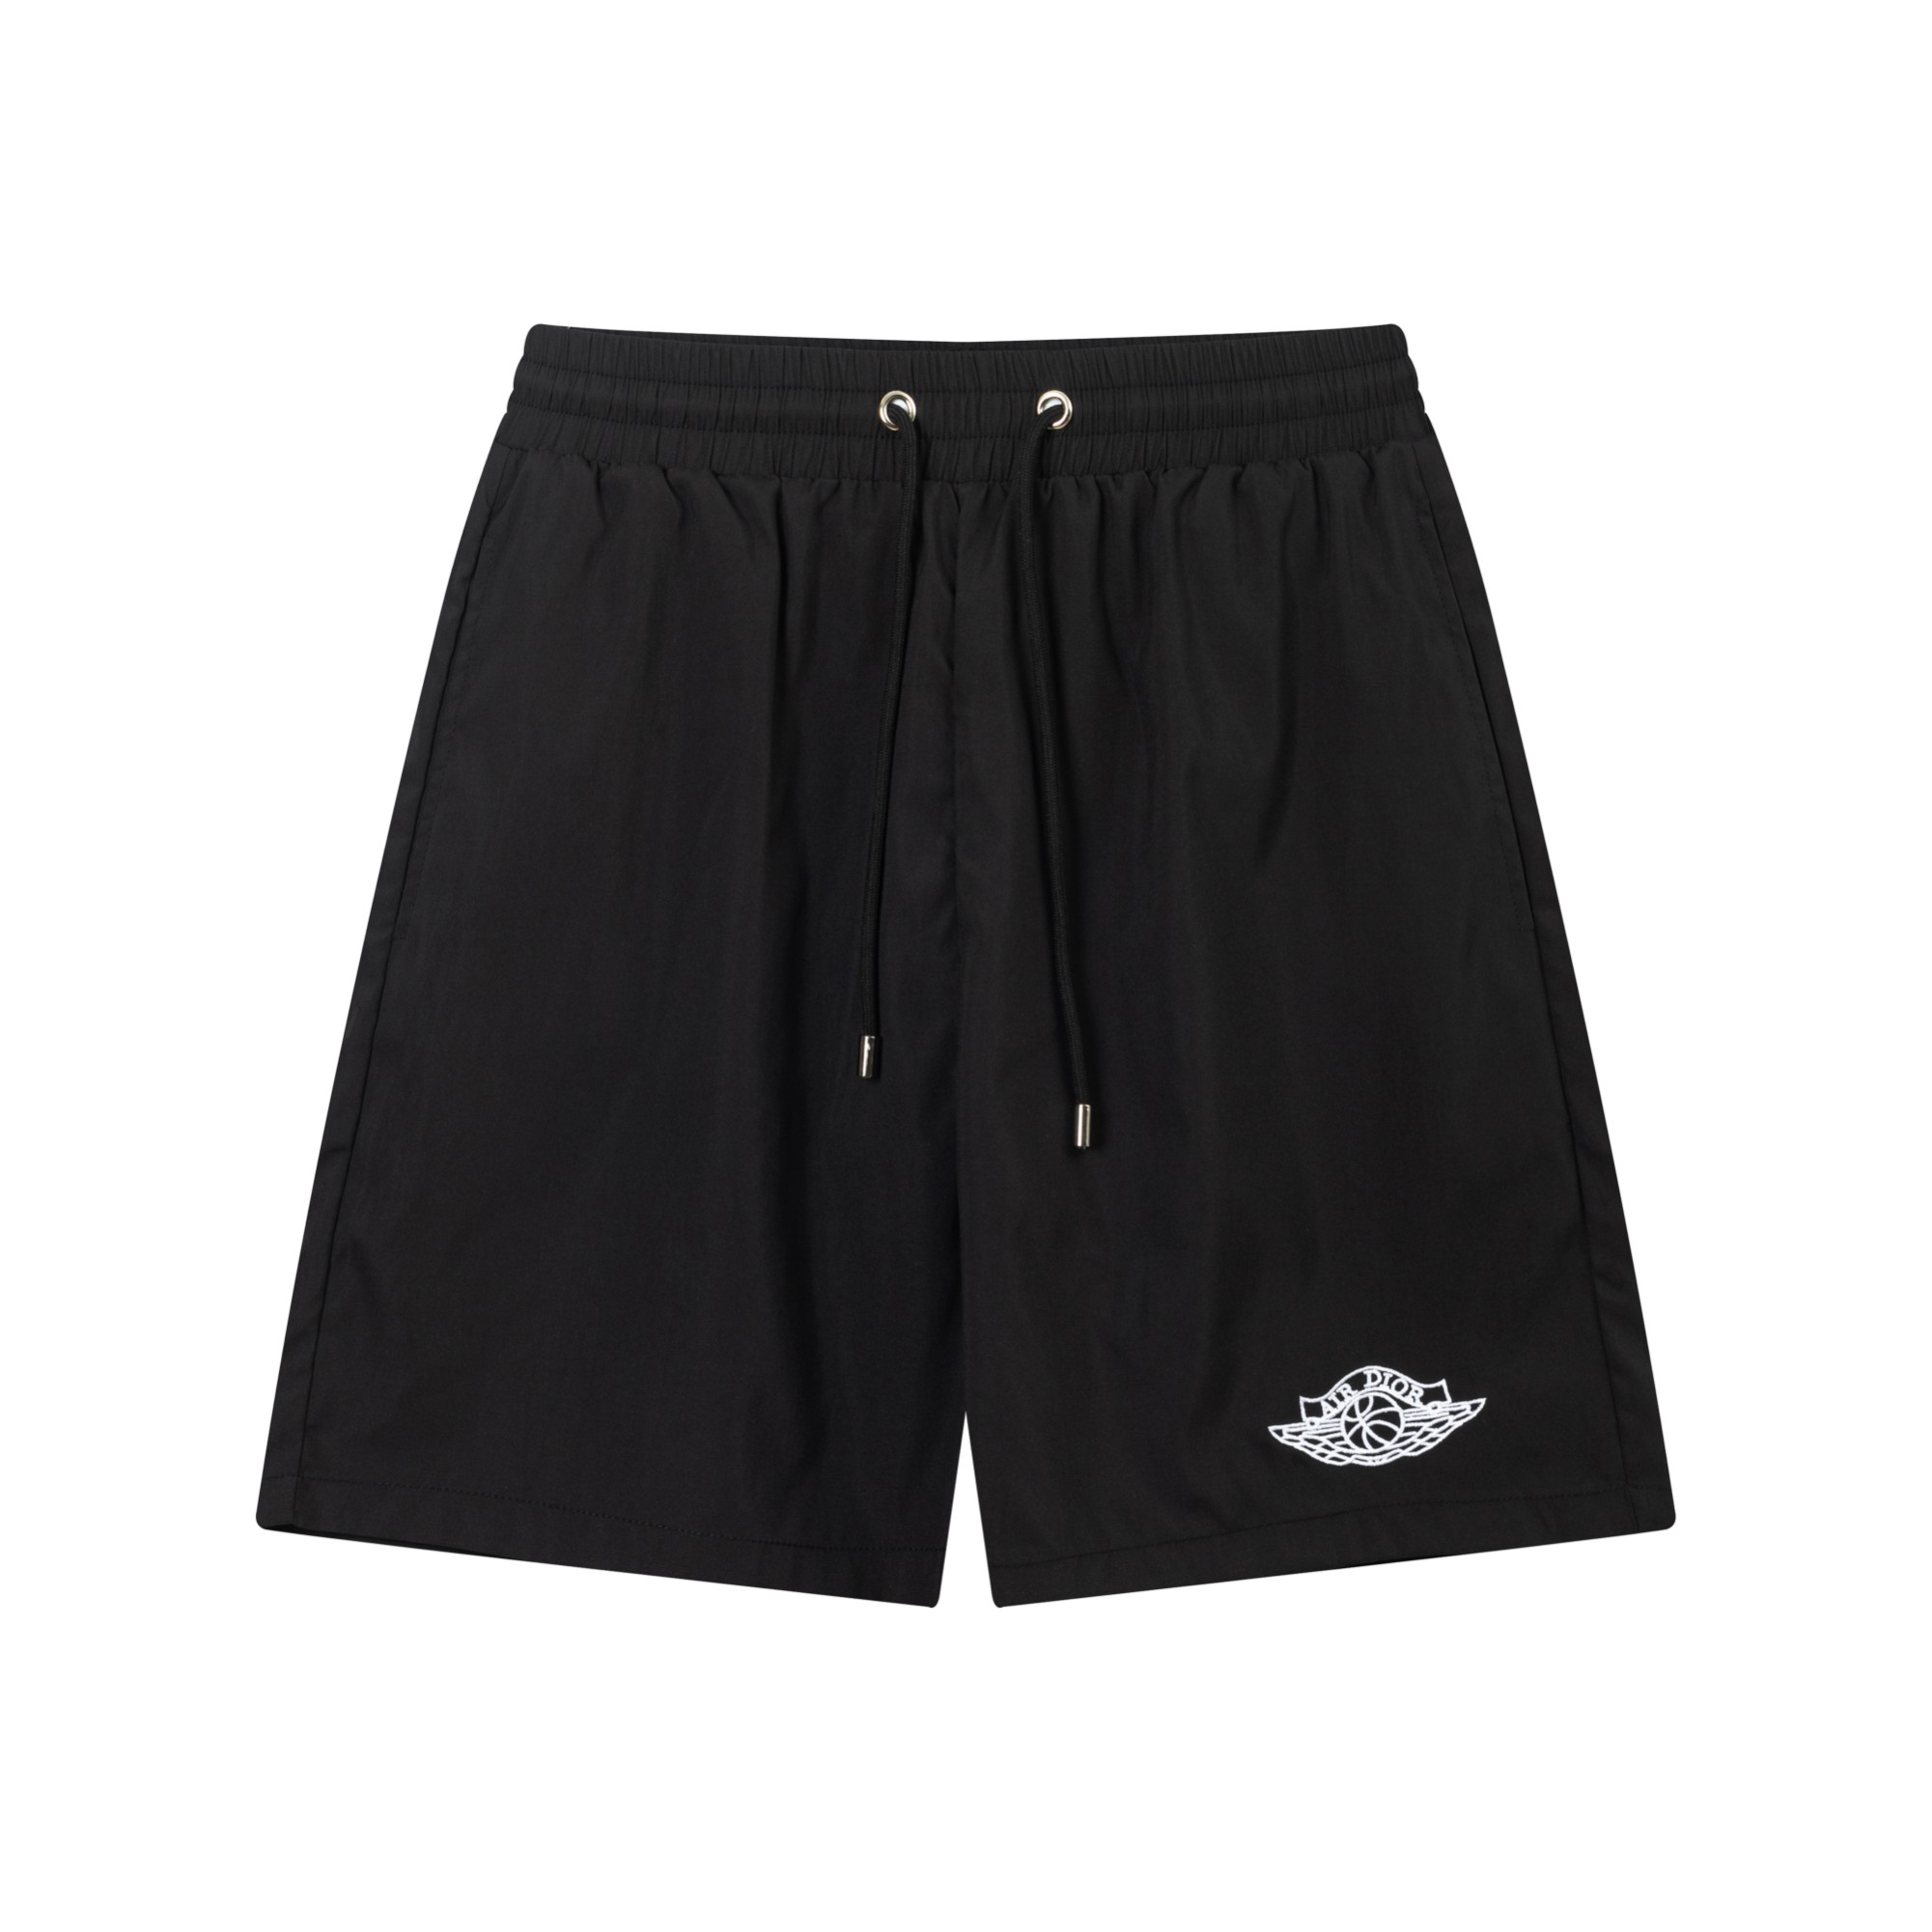 Dior Clothing Shorts Black Polyester Spring/Summer Collection Beach